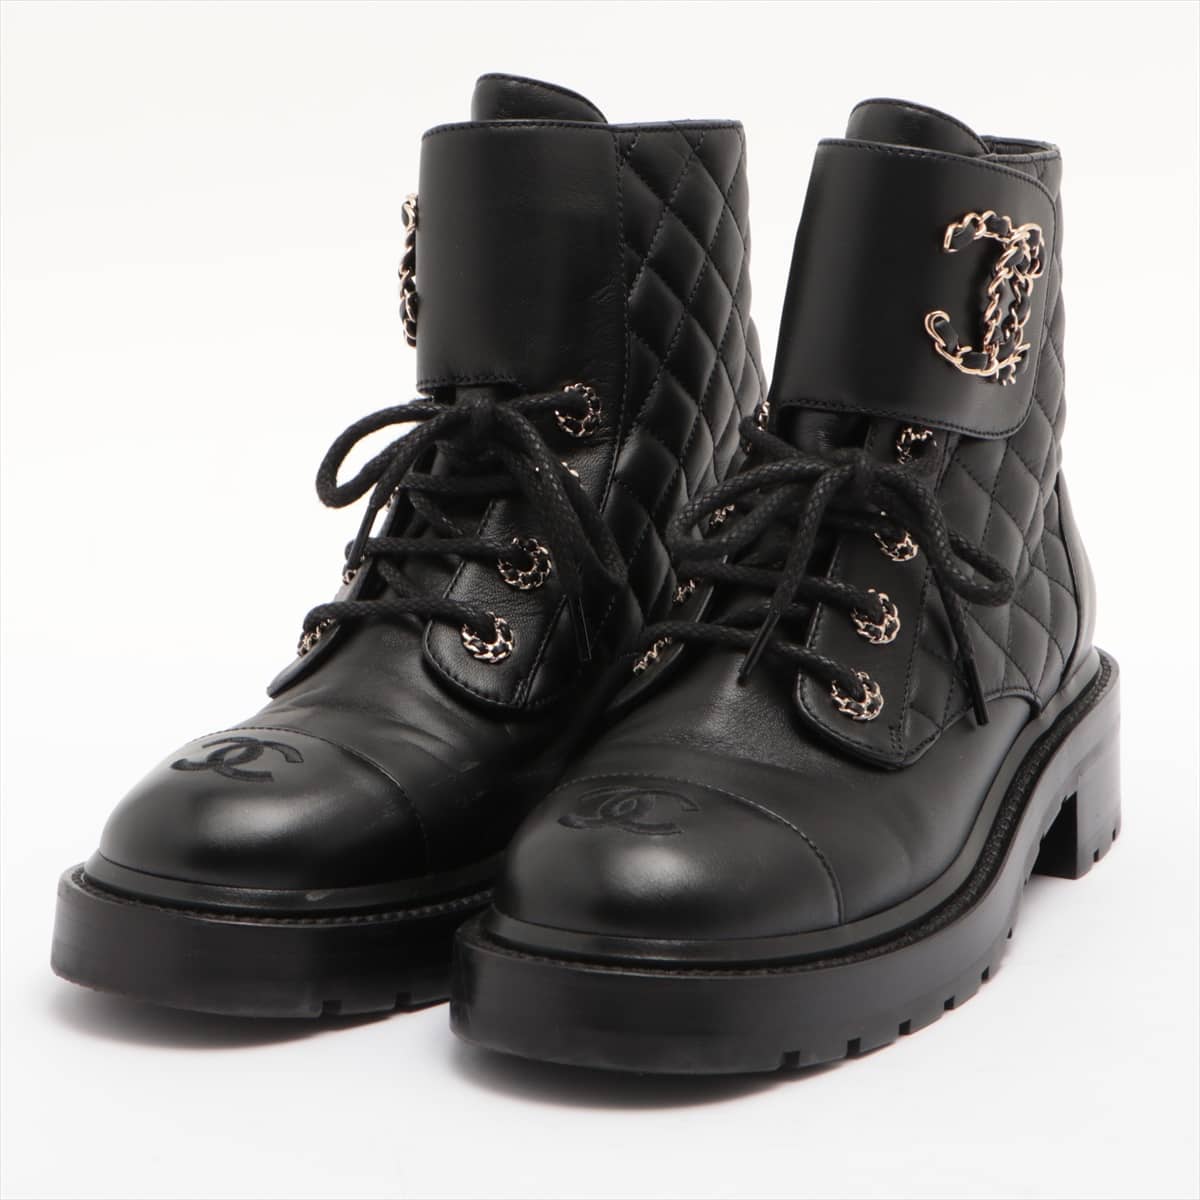 Chanel Coco Mark Matelasse 20A Leather Boots 38 Ladies' Black Lace up G36424 X51906 94305